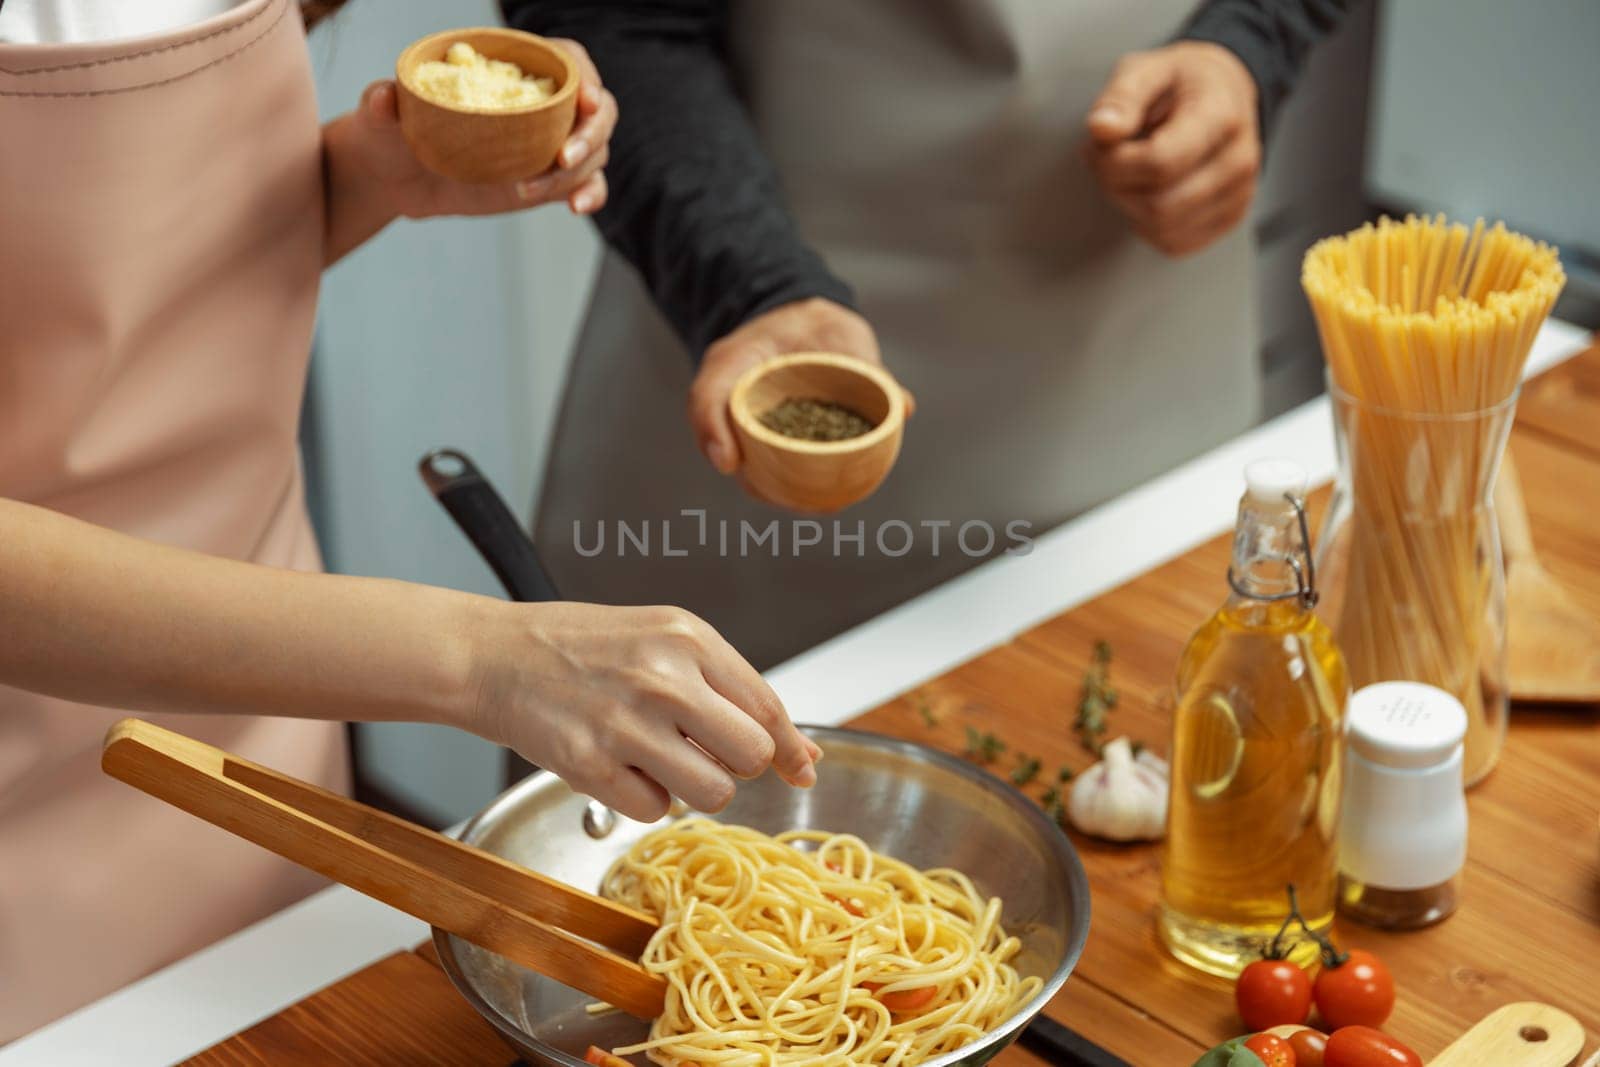 Close up of hand couple chef influencers cooking spaghetti mix ingredient taking to frying pan, putting seasoning and tasty sauce to make good flavor, Concept of presenting homemade food. Postulate.